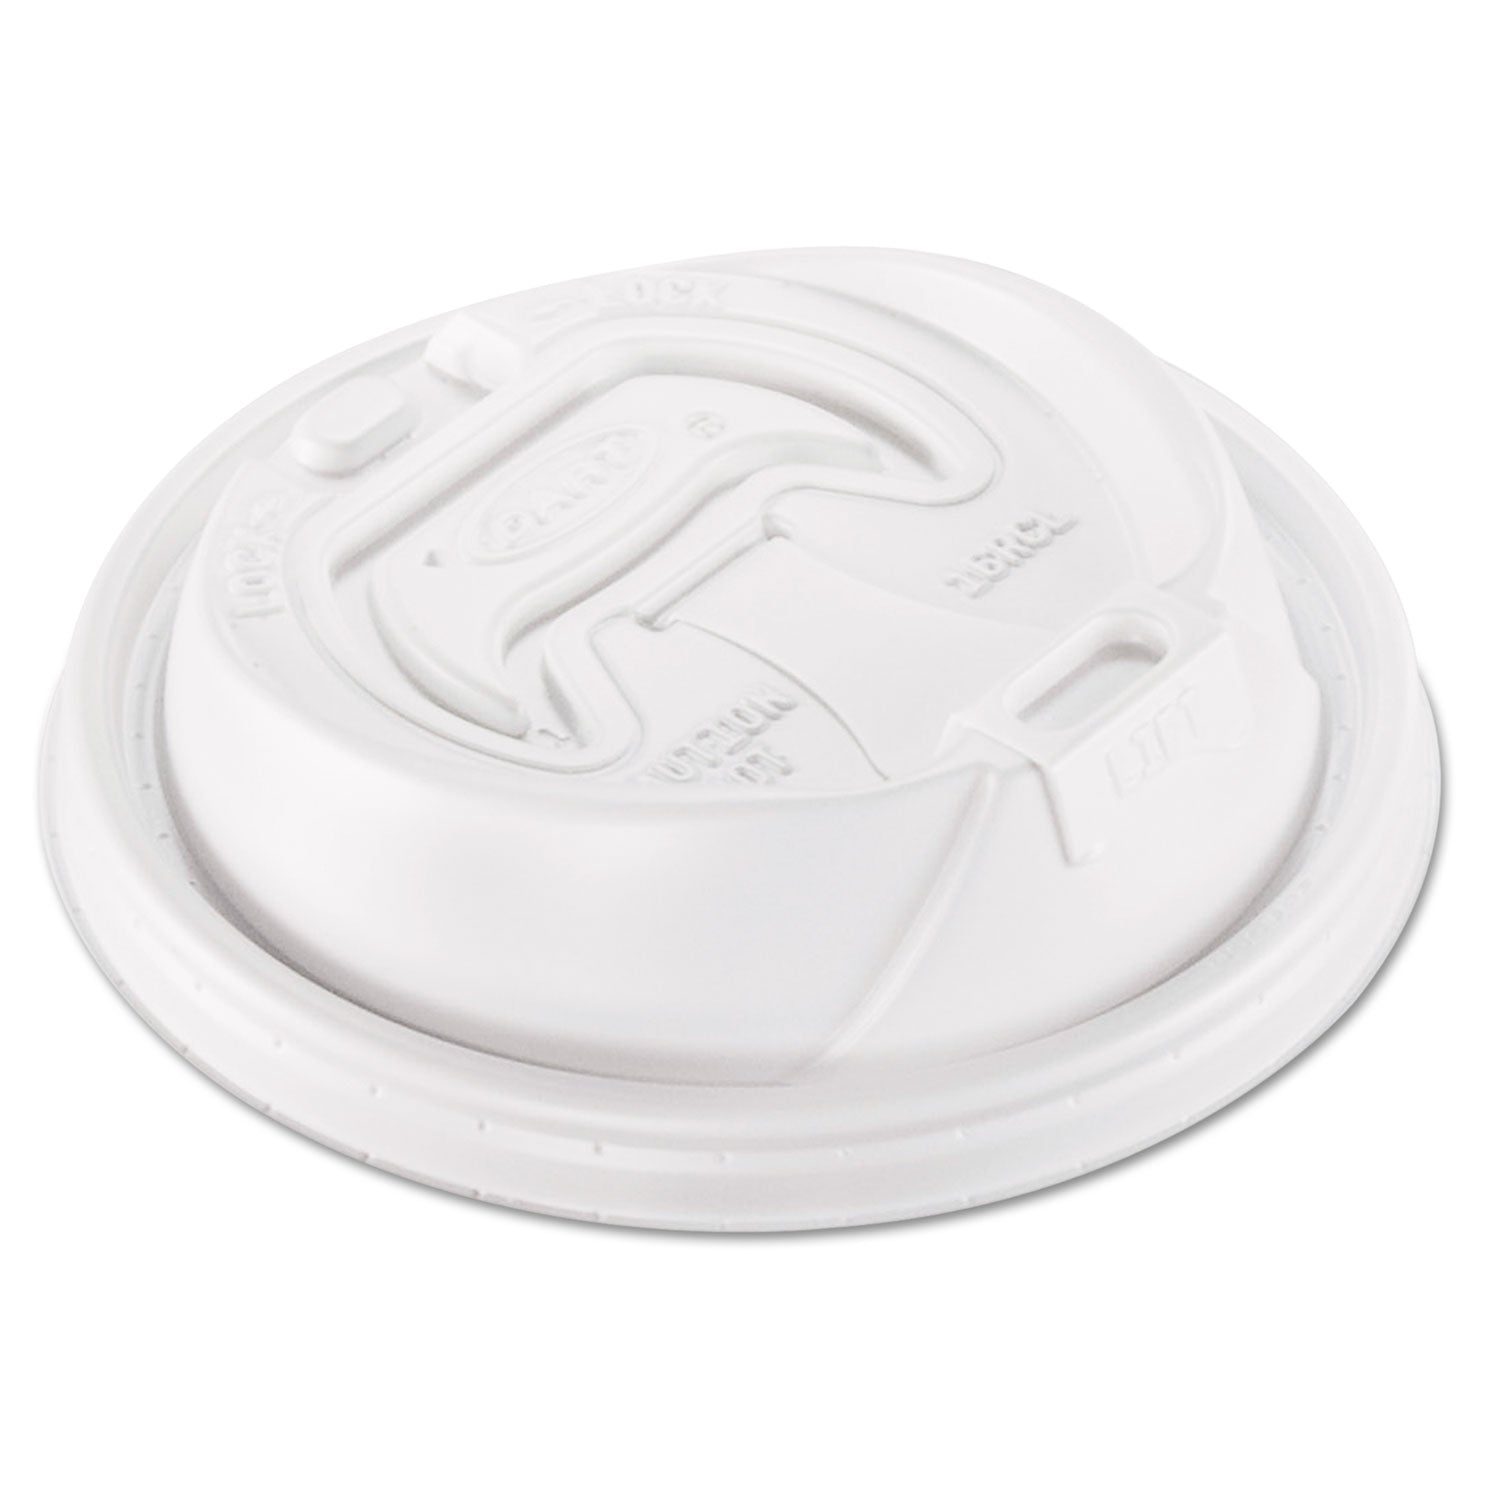 Optima Reclosable Lid, Fits 12 oz to 24 oz Foam Cups, White, 100 Pack, 10 Packs/Carton - 